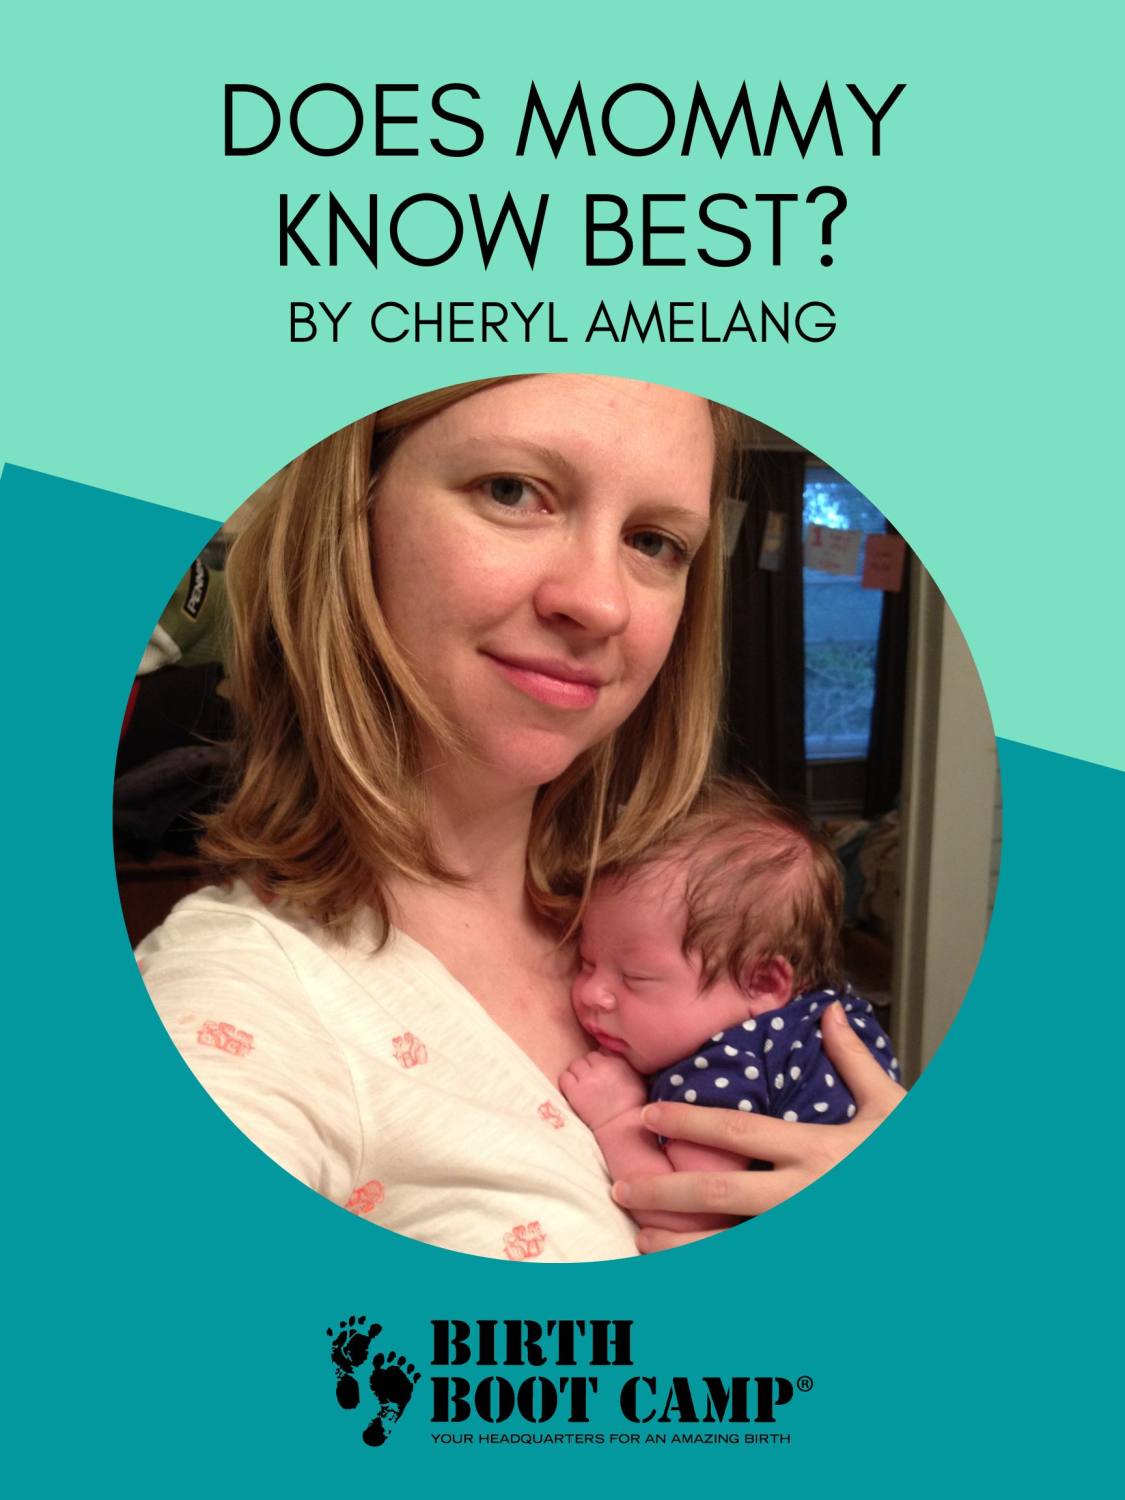 Does Mommy Really Know Best?